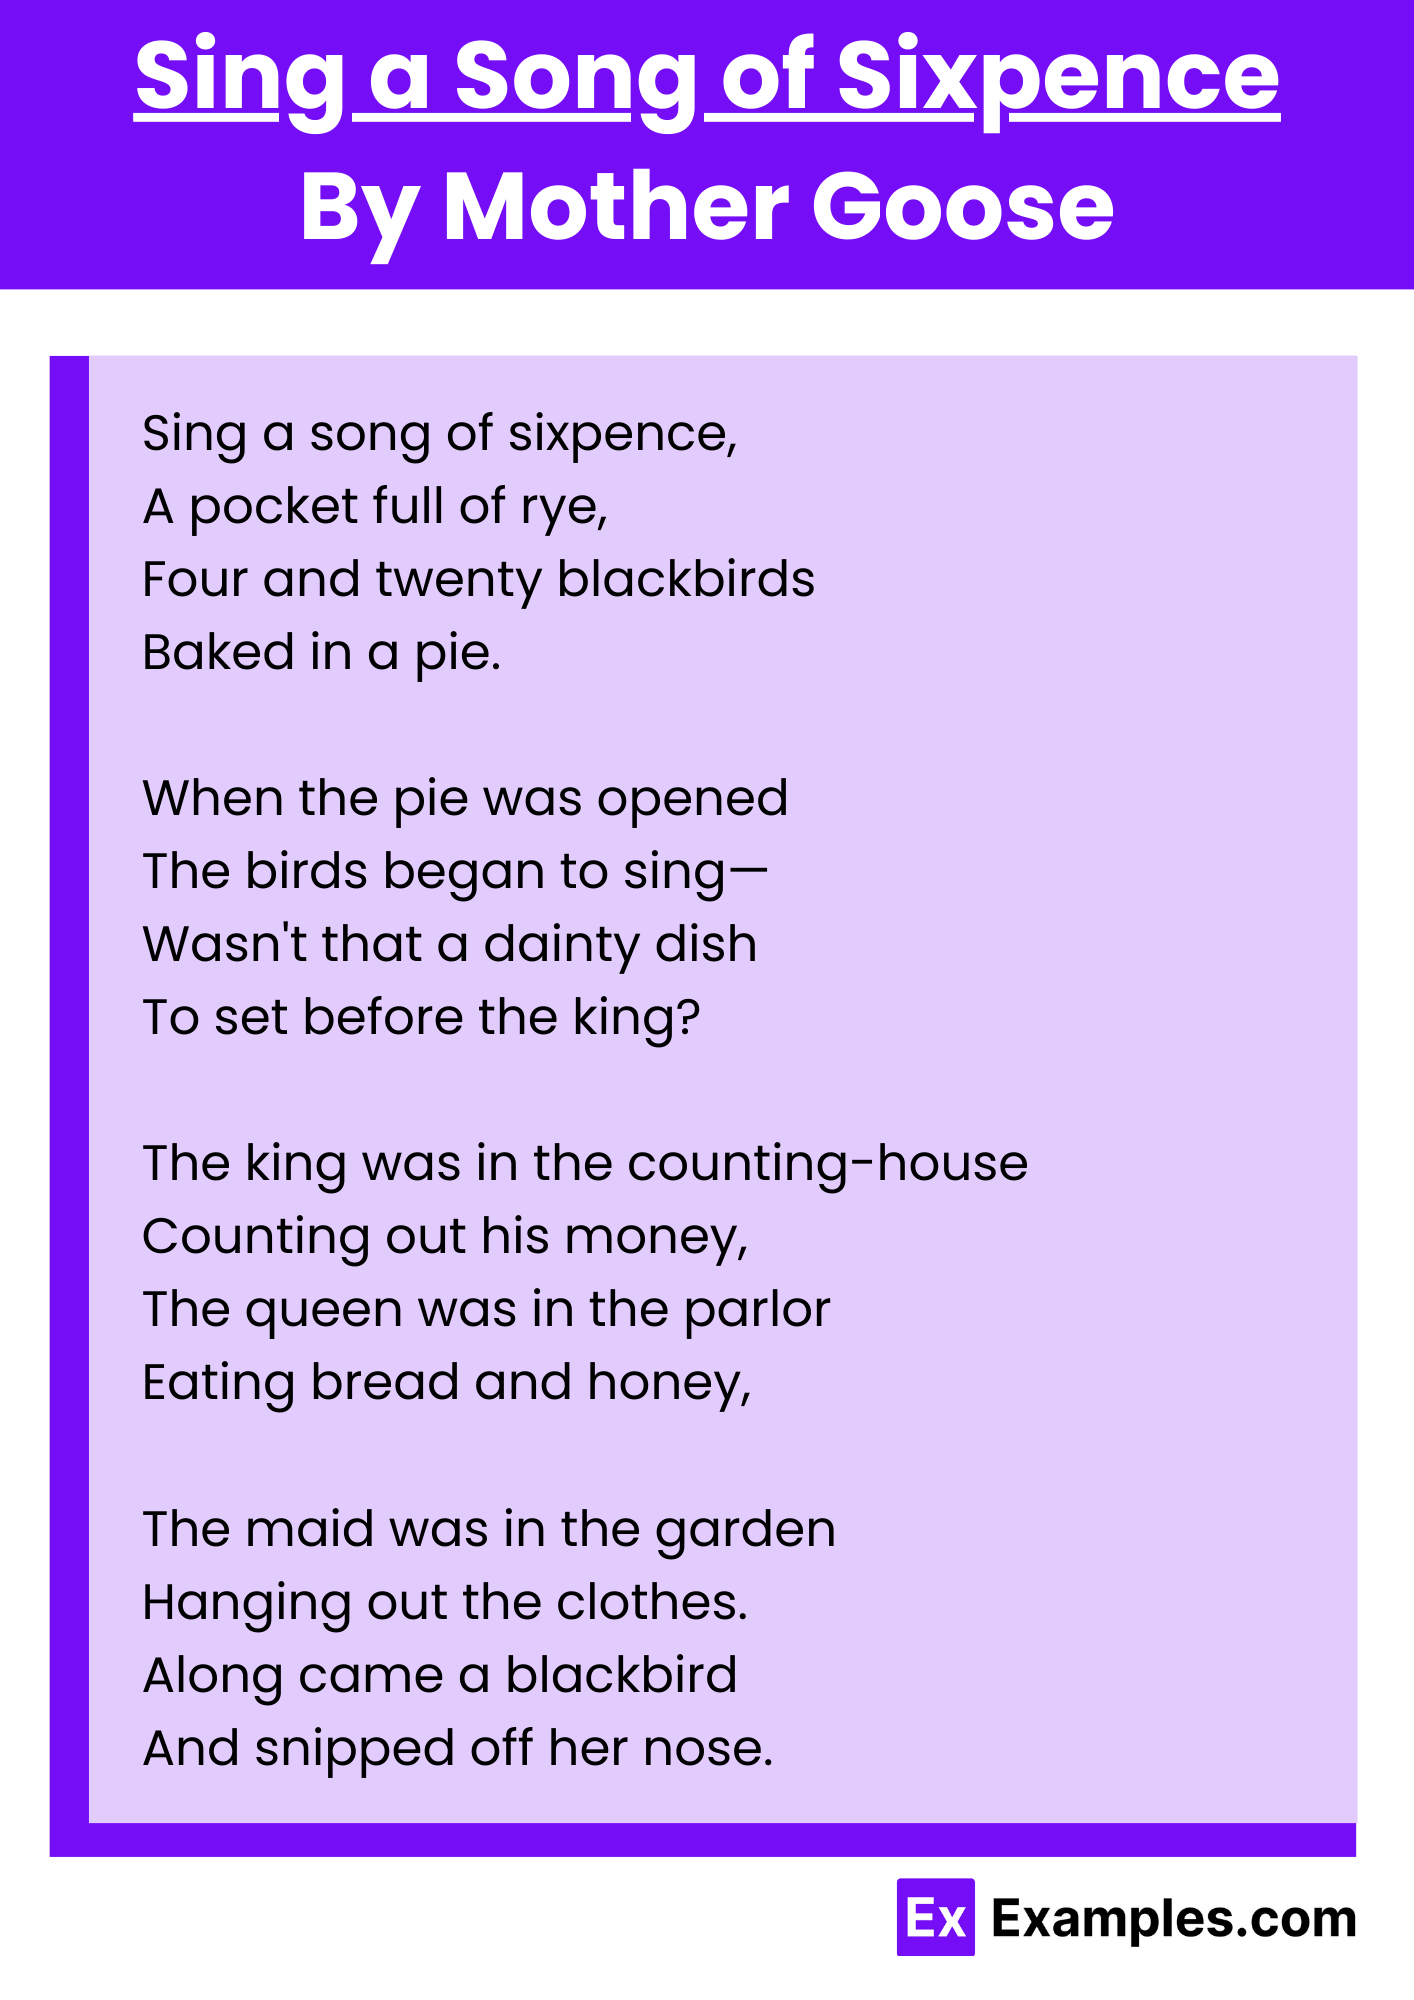 Sing a Song of Sixpence By Mother Goose